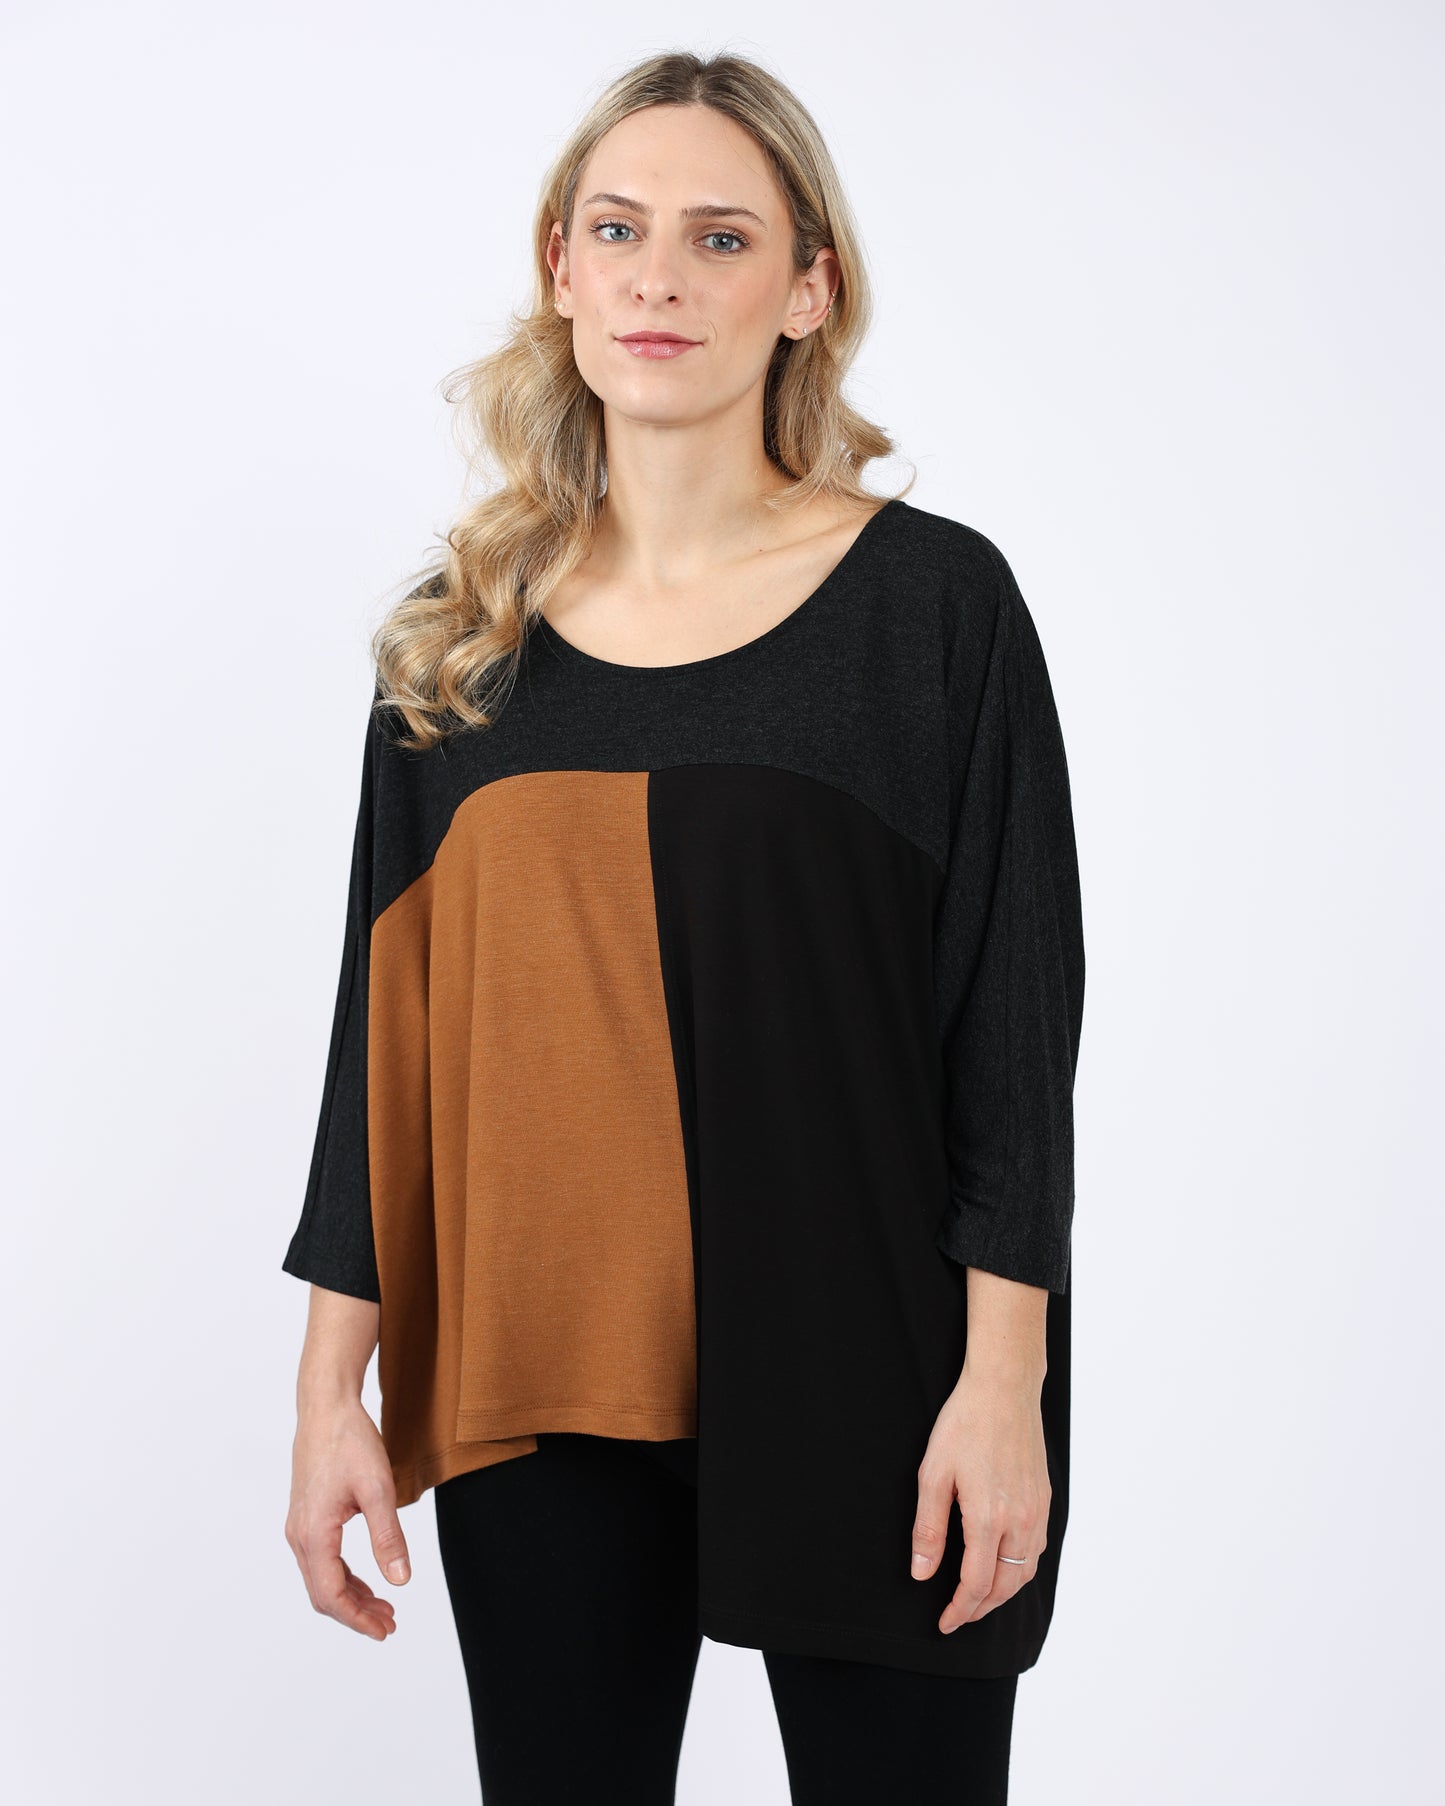 A woman wearing the Shannon Passero Olenna Pullover.